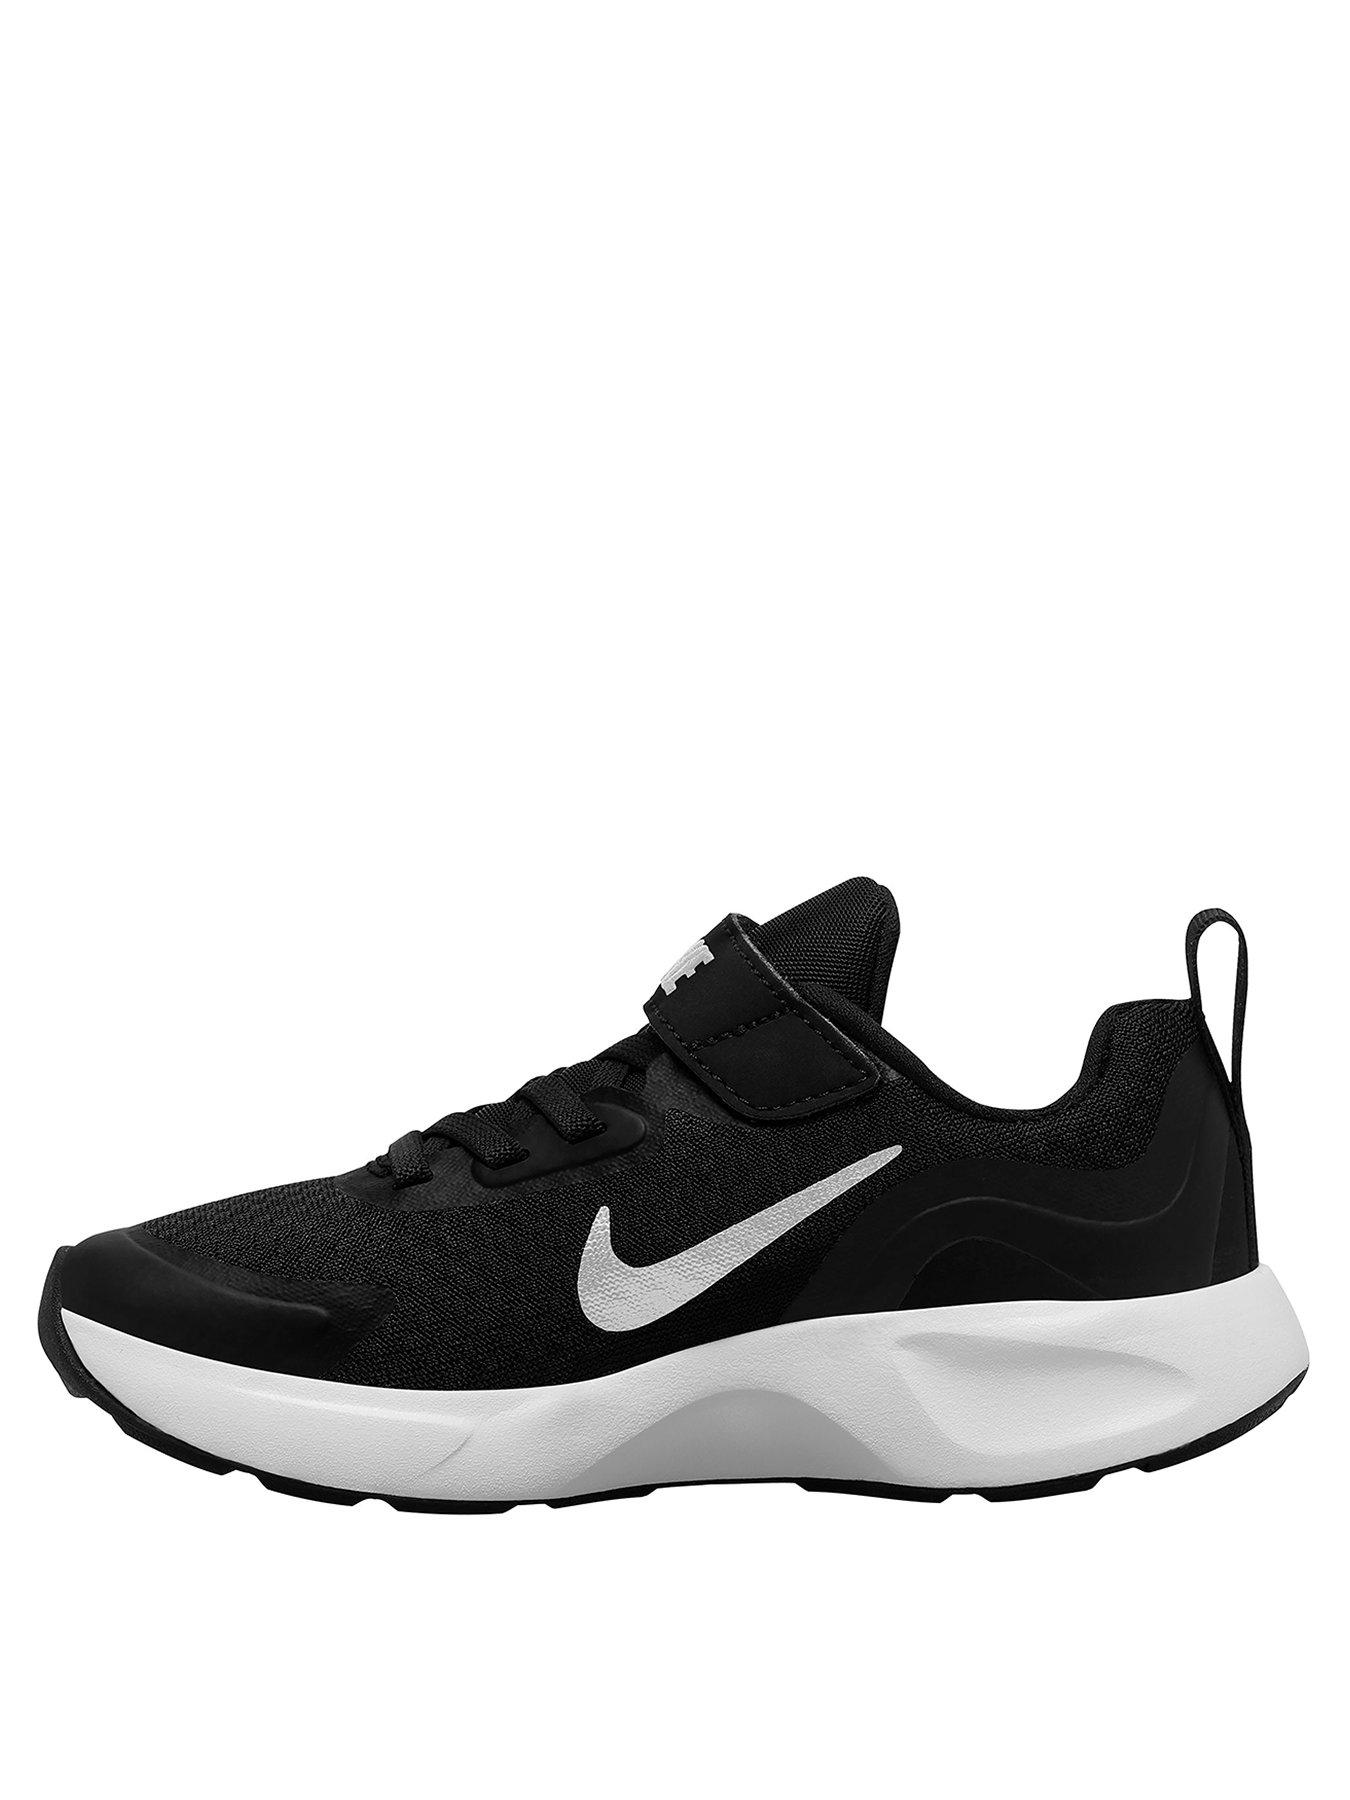 Nike Wearallday Childrens Trainer - Black/White | very.co.uk